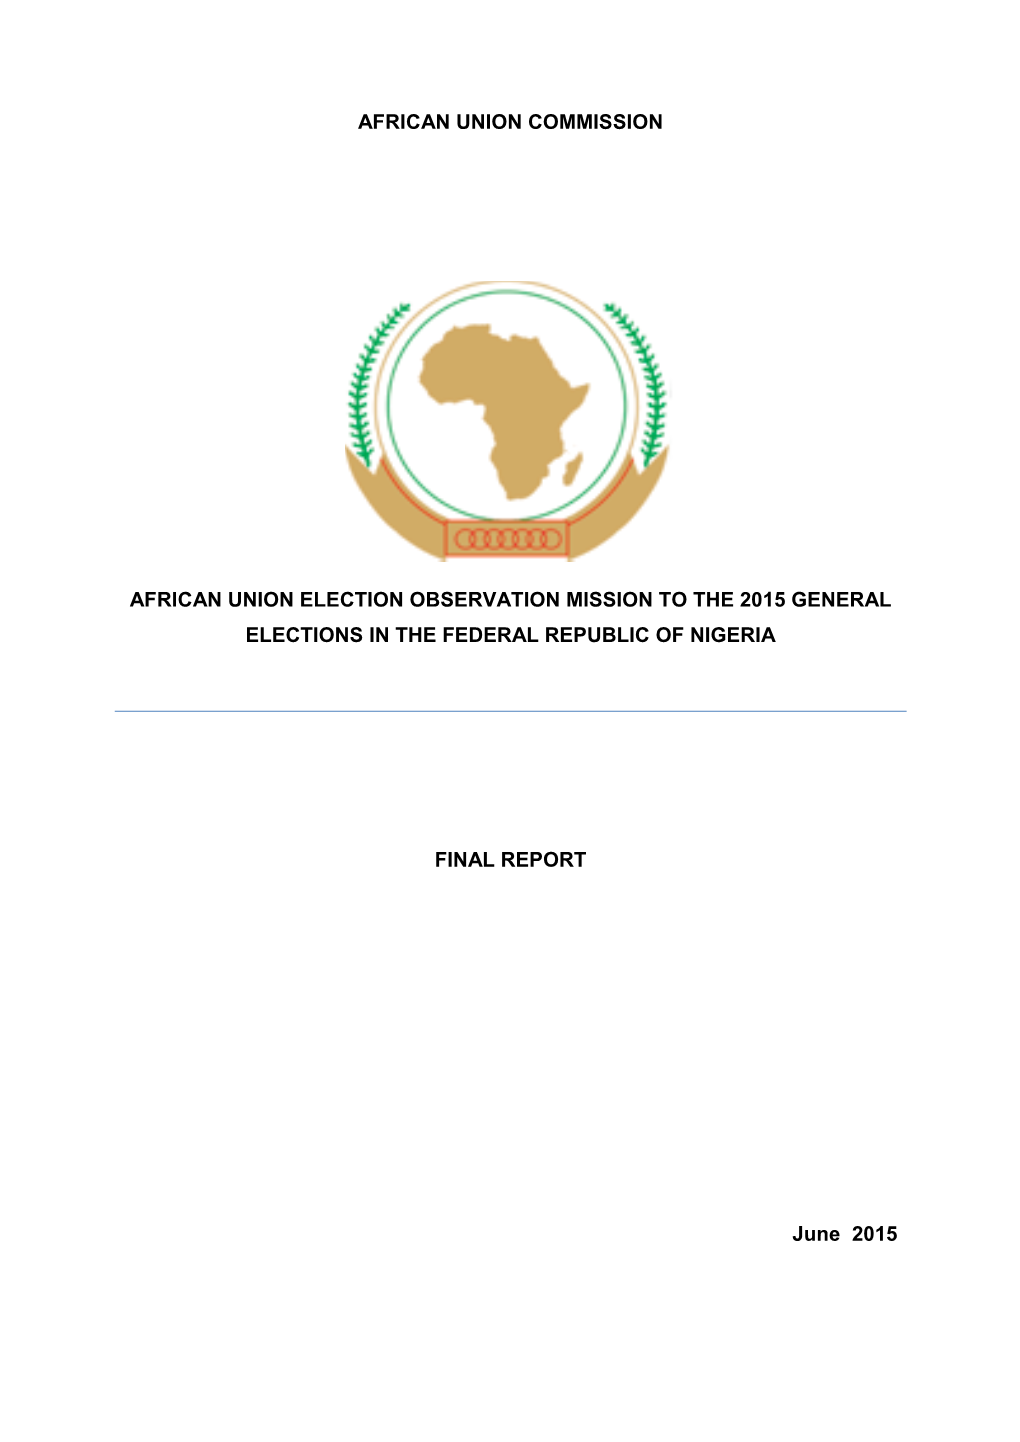 African Union Election Observation Mission Report: Nigeria 2015